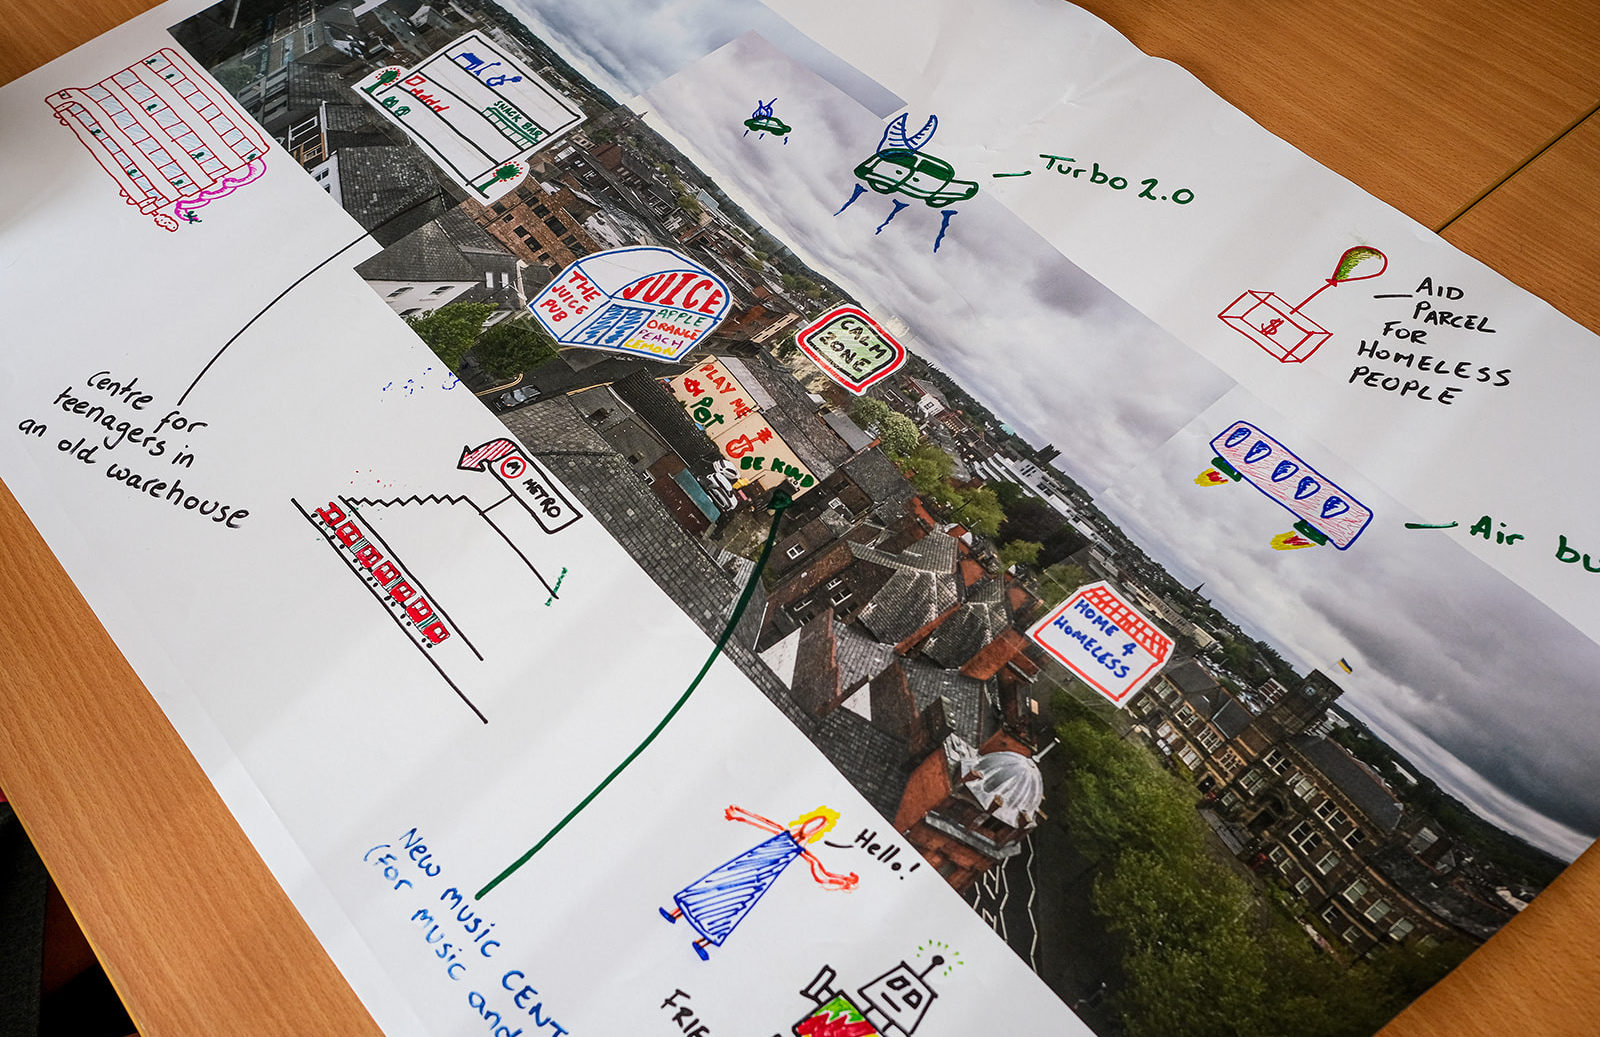 A panoramic photograph of St Helens is illustrated with ideas on how to improve the town.